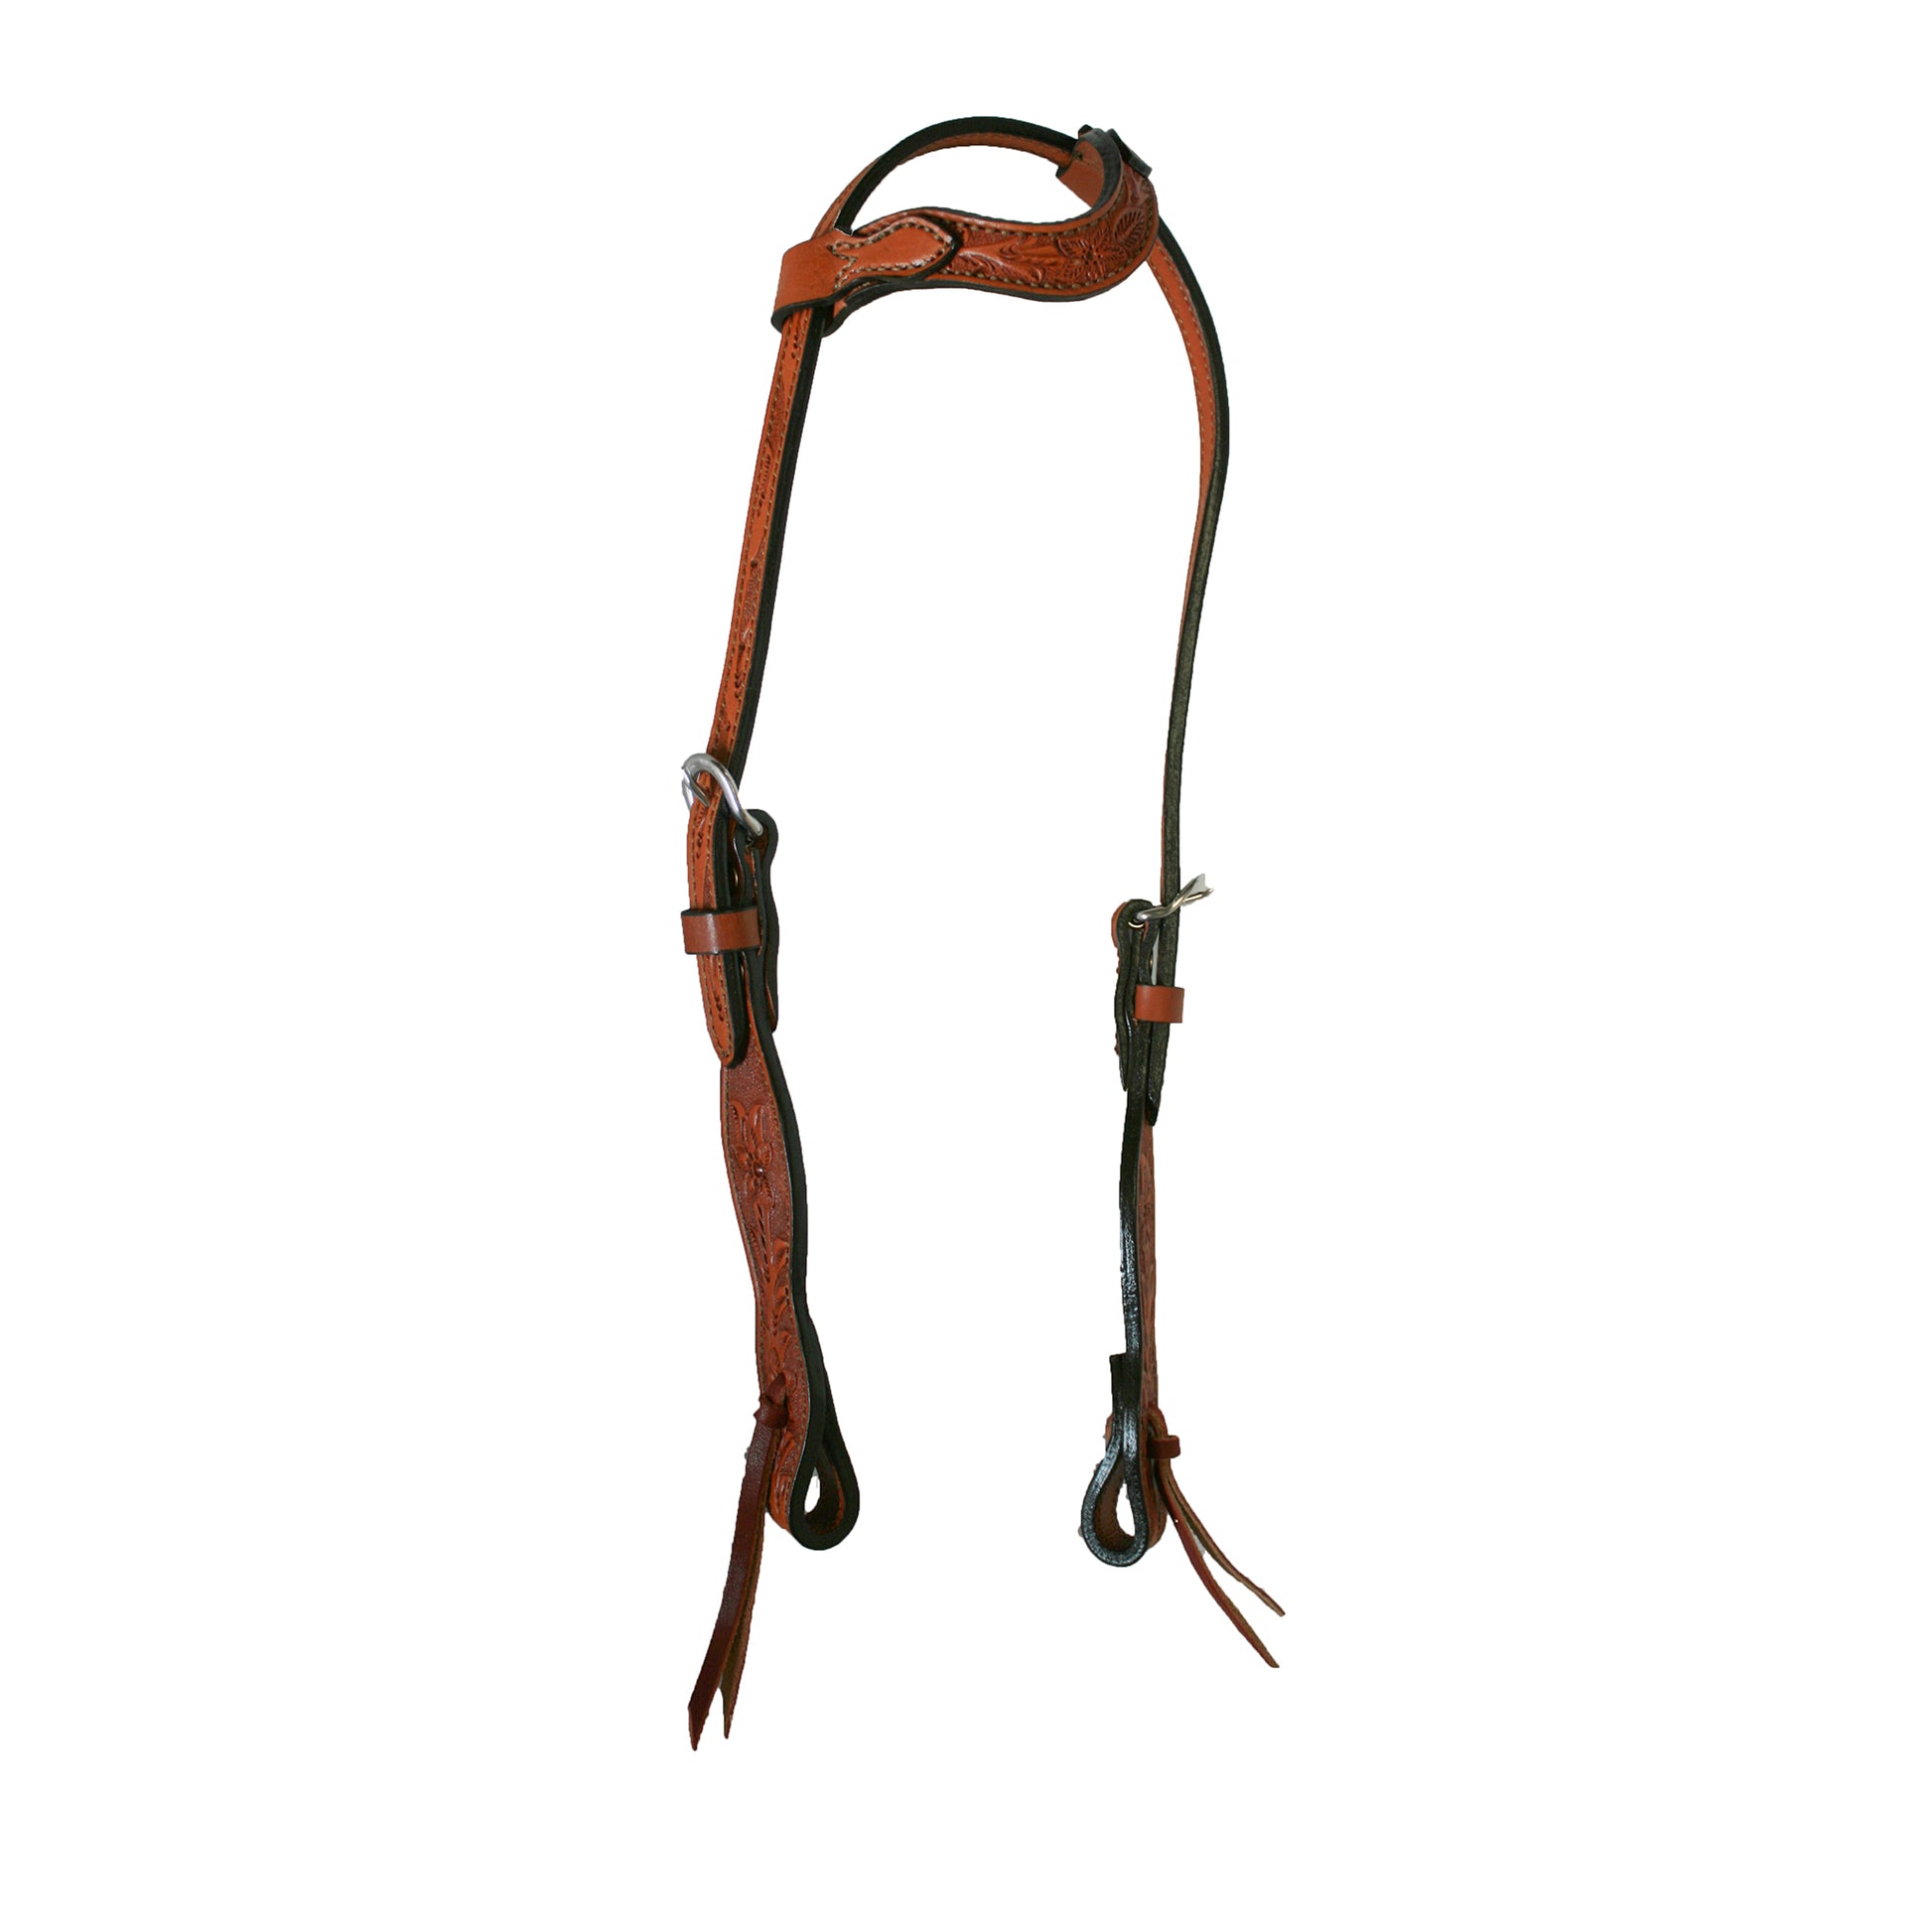 5/8" wave one ear headstall toast leather AA tooling.